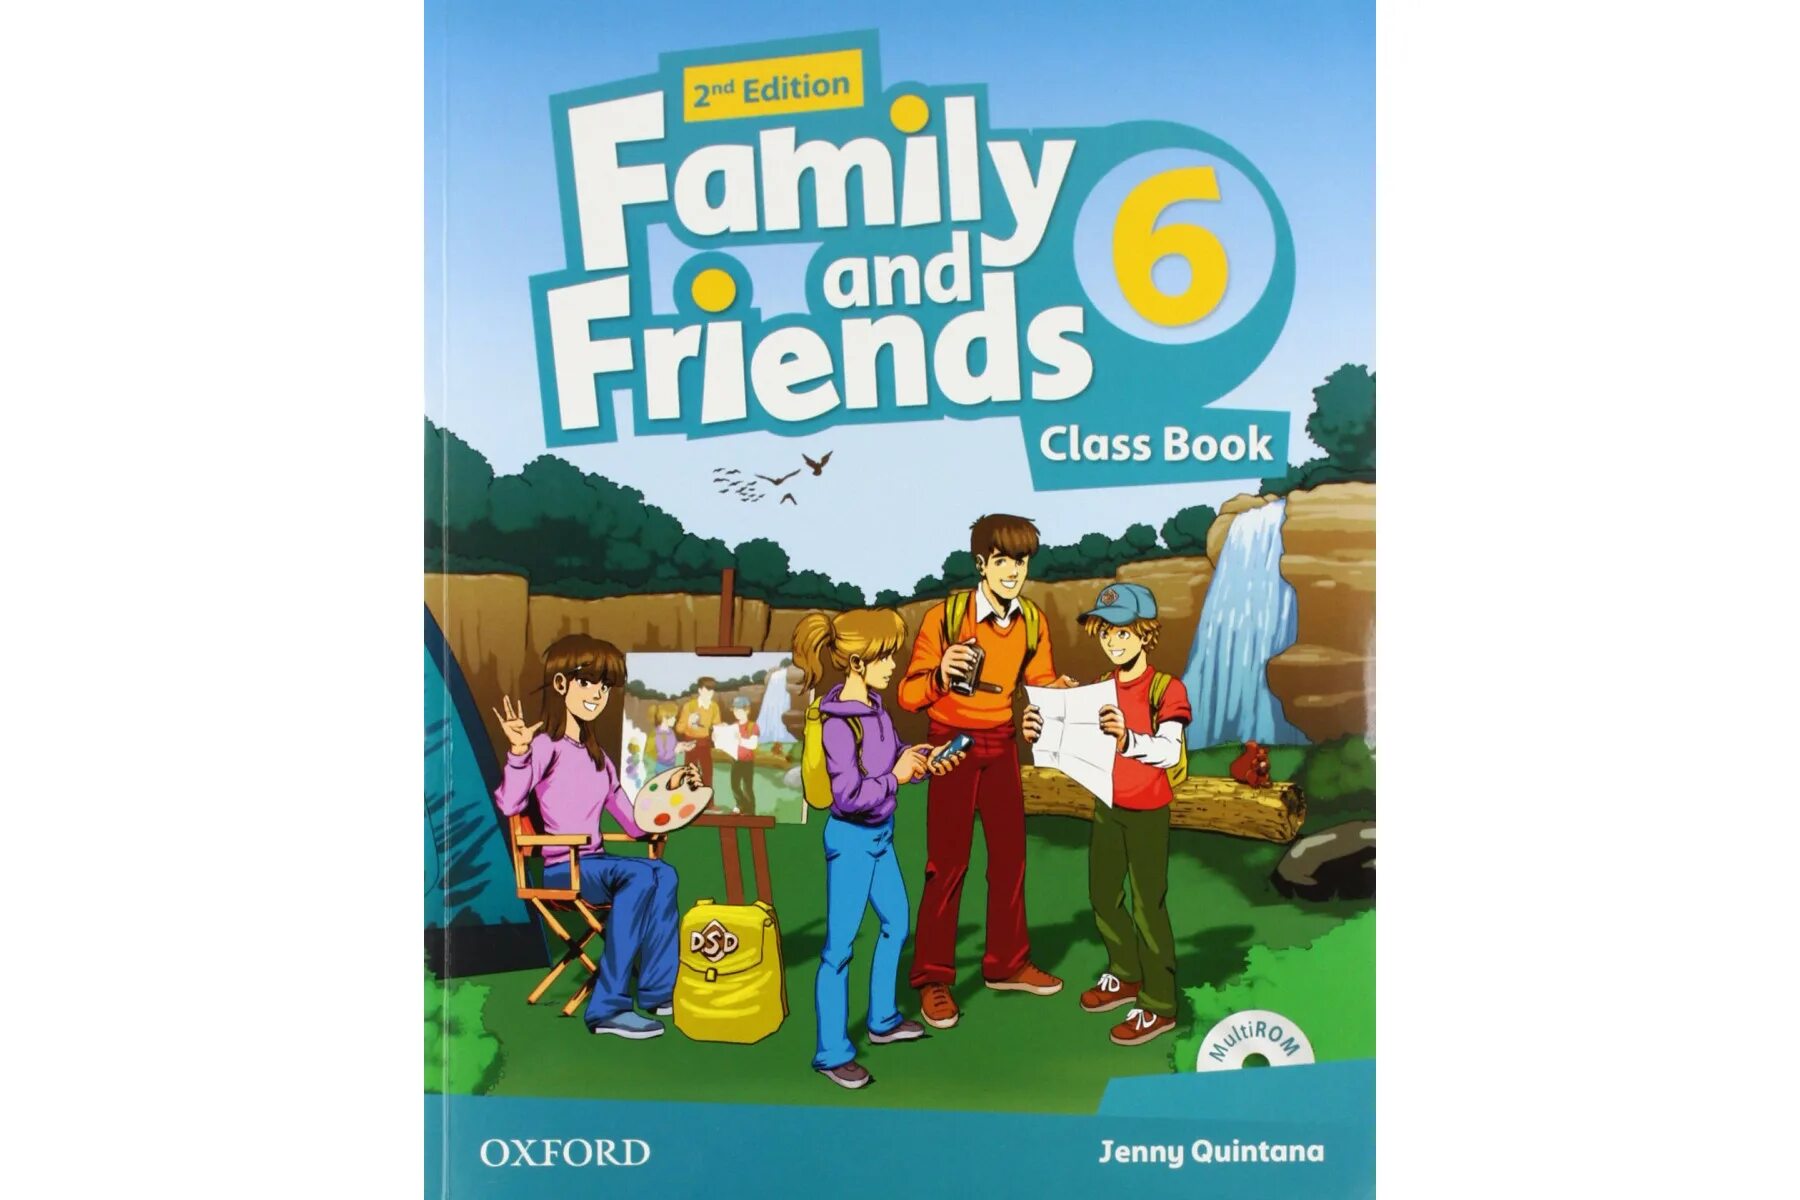 Family and friends students book. Фэмили френдс 2. Family and friends 5 класс. Family and friends 6 класс. Family and friends 5 class book.